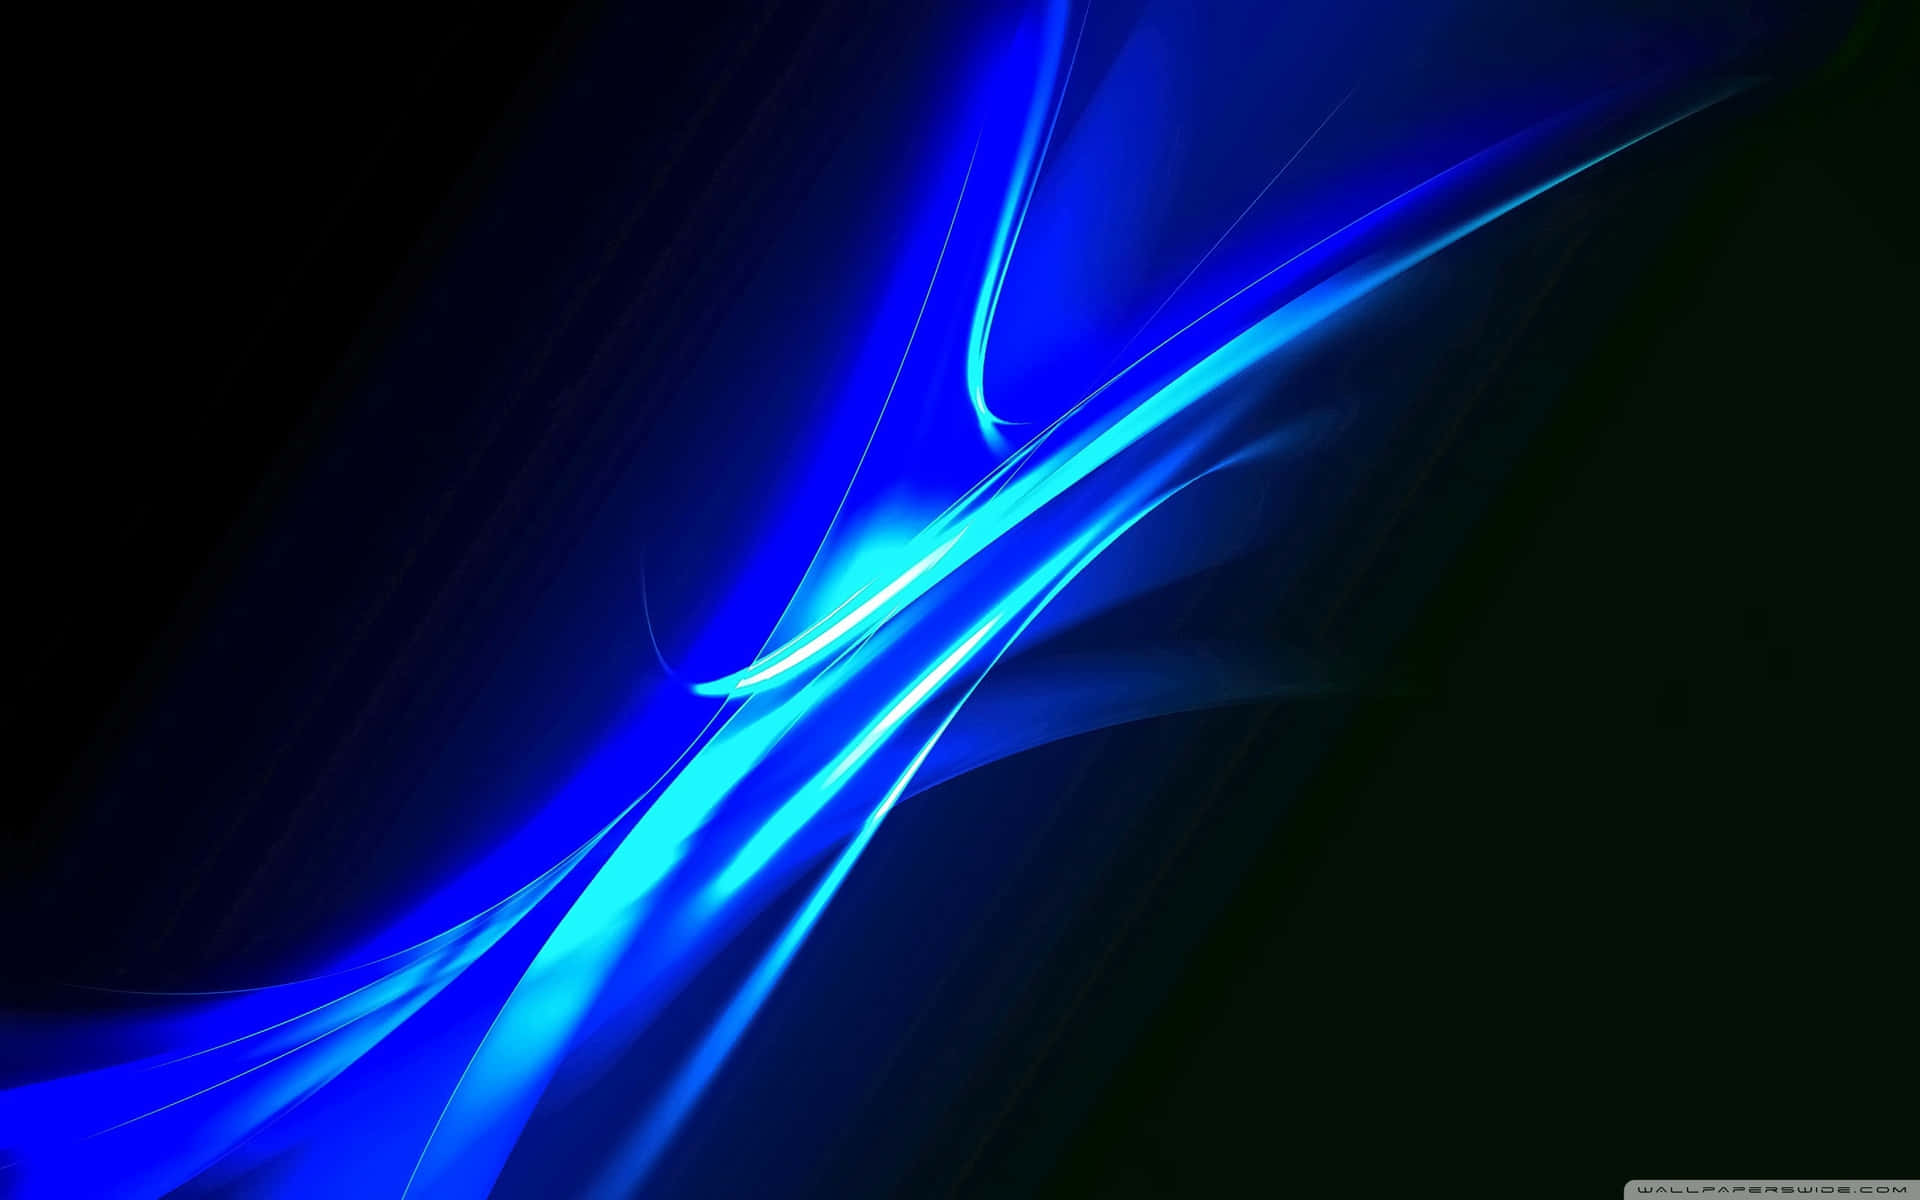 Shine Bright with Blue Neon Lights Wallpaper